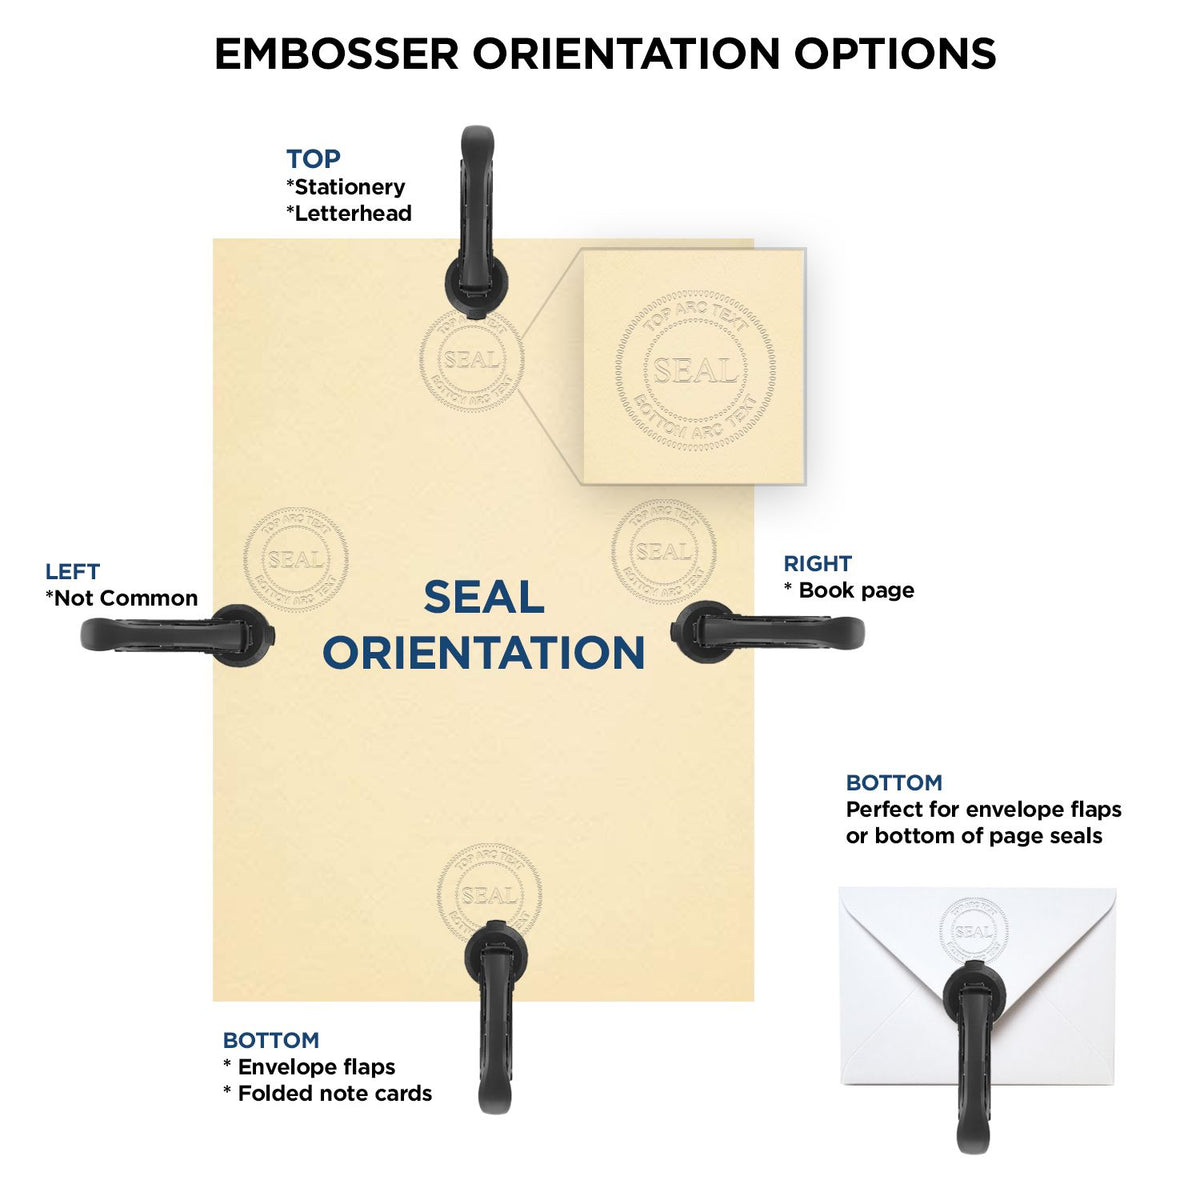 An infographic for the State of Tennessee Extended Long Reach Geologist Seal showing embosser orientation, this is showing examples of a top, bottom, right and left insert.